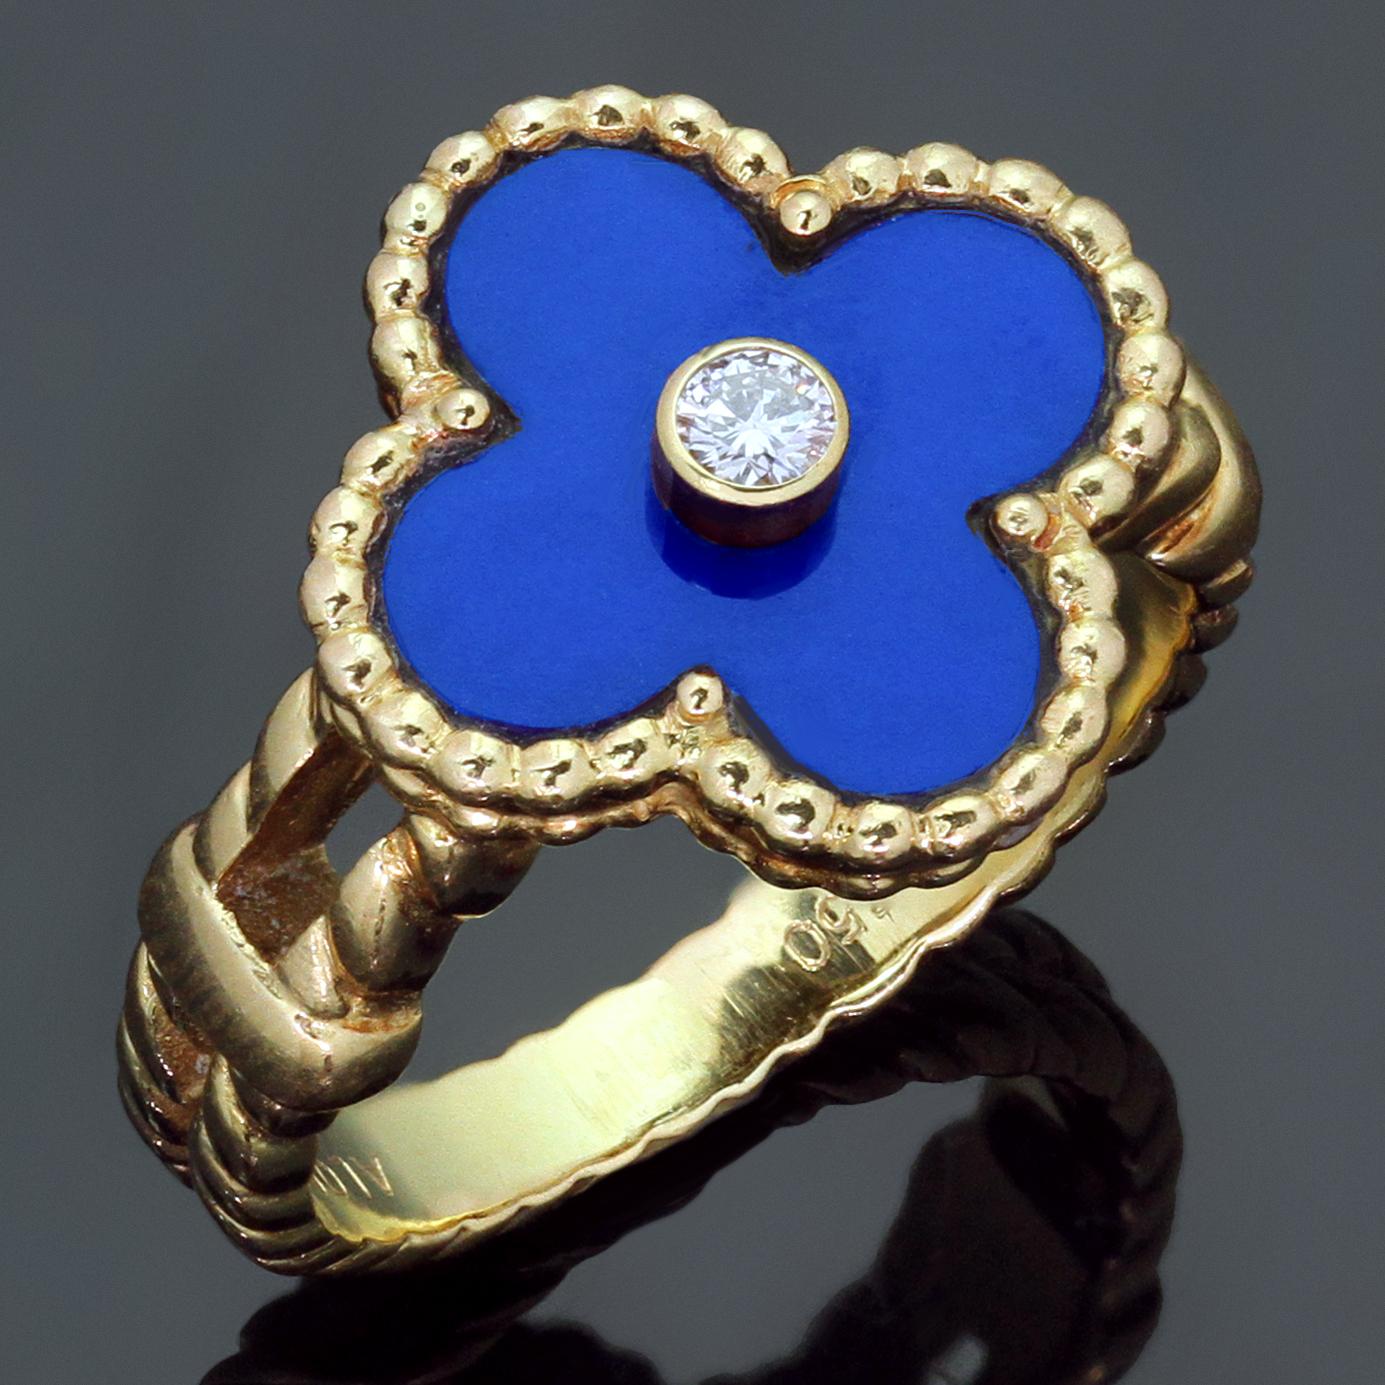 This fabulous Van Cleef & Arpels ring from the iconic Vintage Alhambra collection features the lucky clover design crafted in 18k yellow gold and bezel-set brilliant-cut round diamond of an estimated 0.06 carats surrounded by blue lapis lazuli